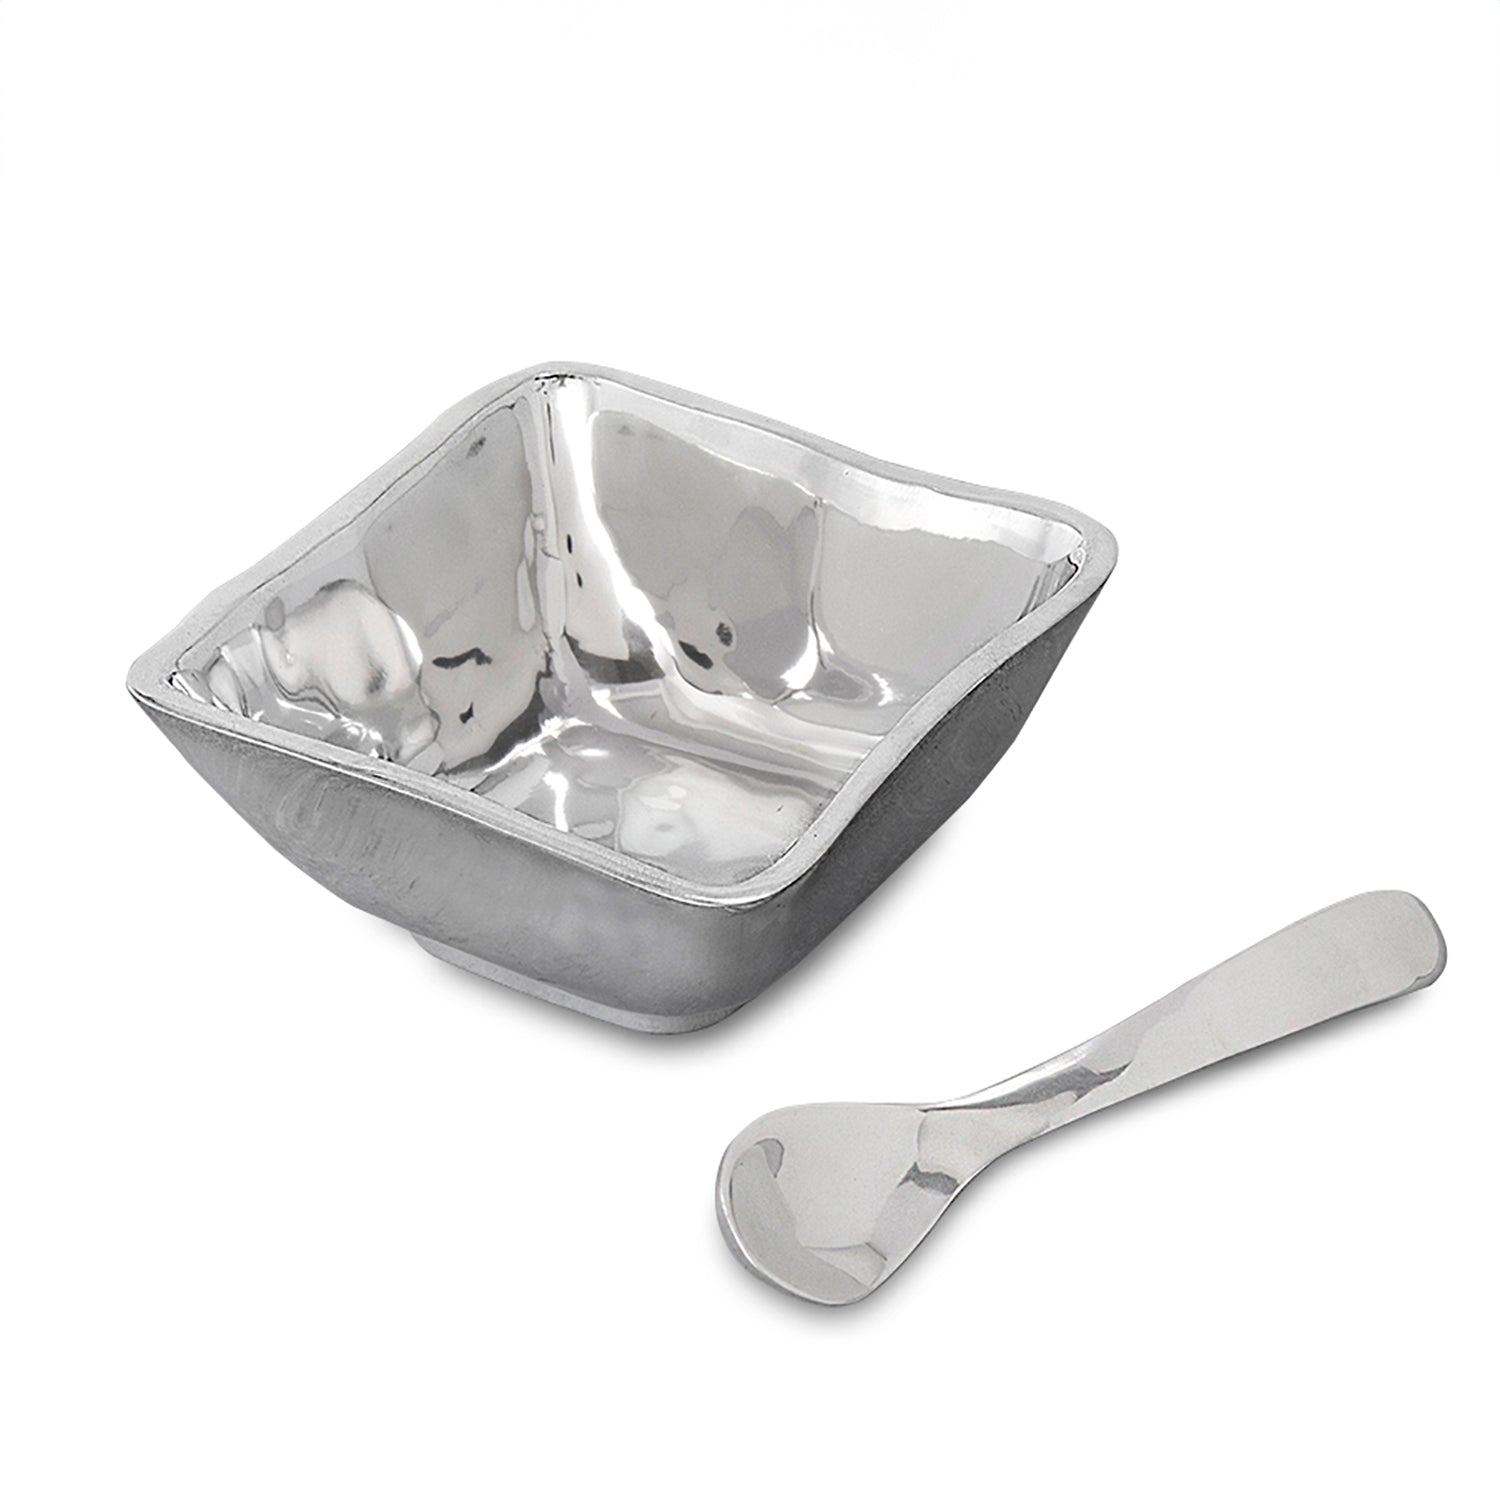 GIFTABLES Soho Square Bowl with Spoon